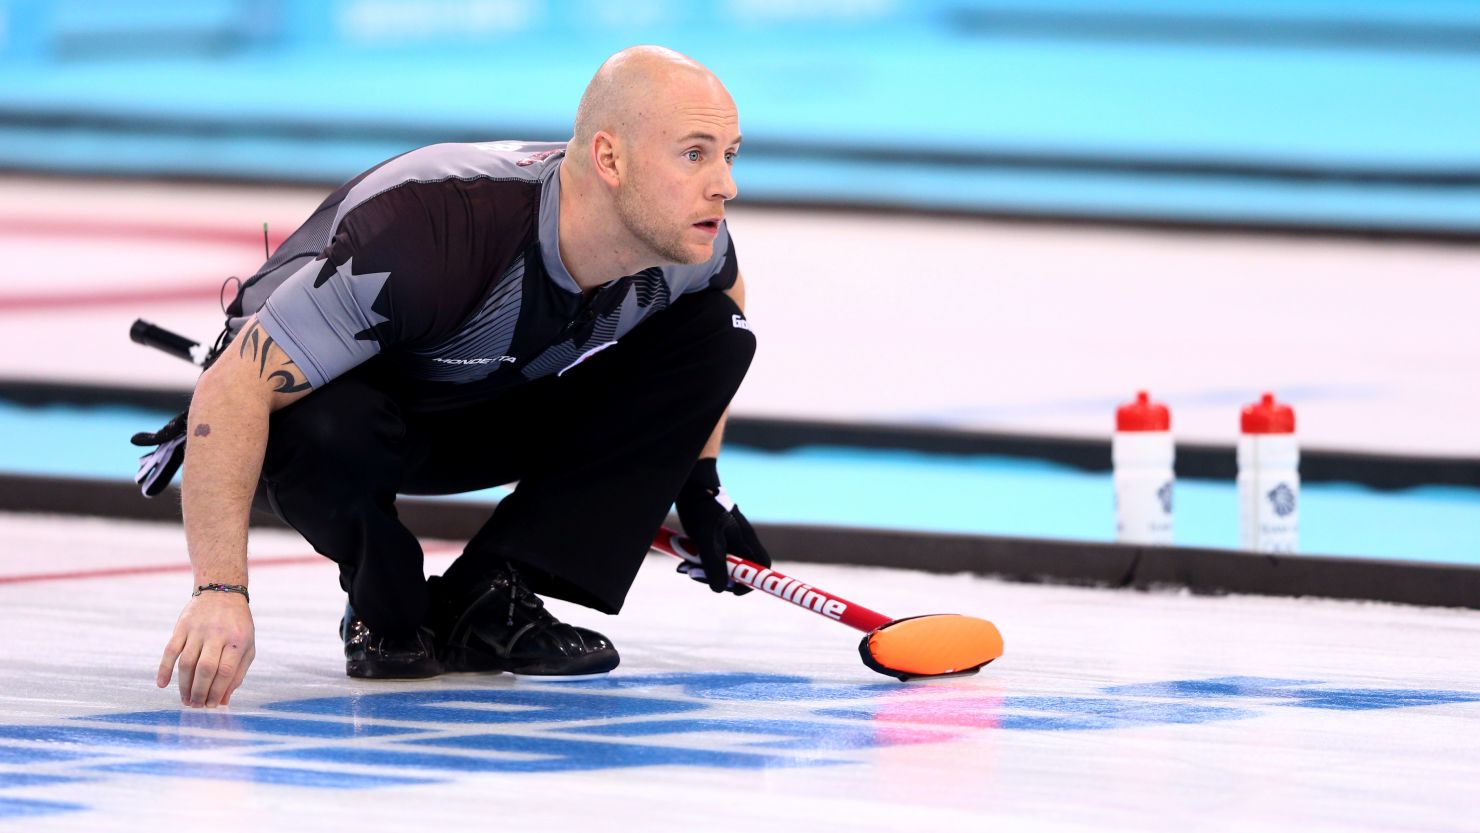 Fry won Olympic gold in 2014 as Canada beat Britain in the men's curling final.